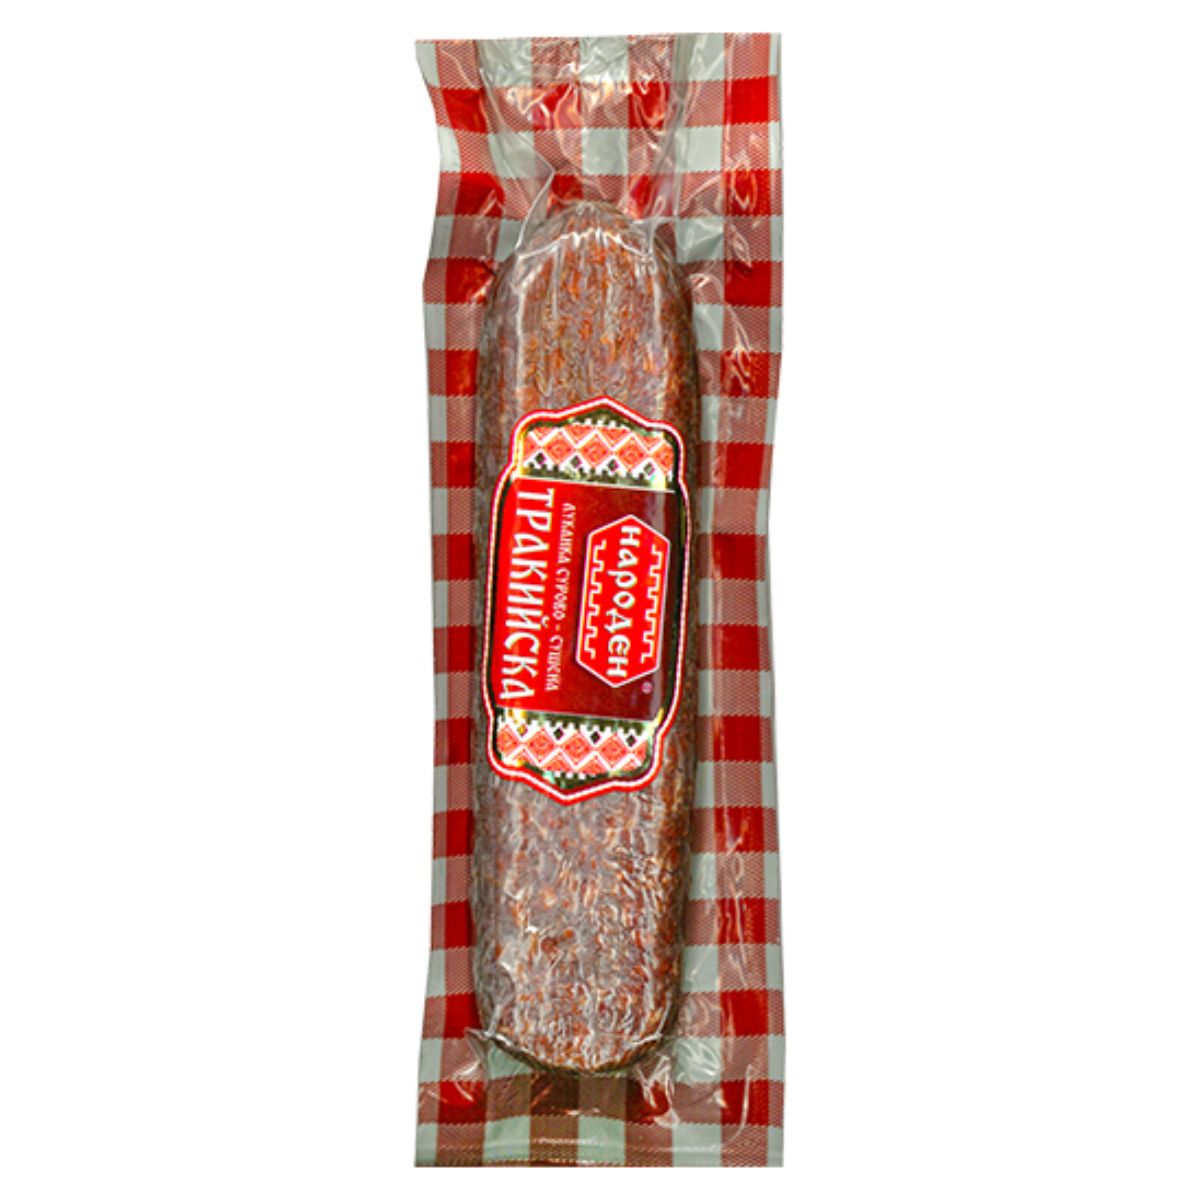 A Bella - Naroden Raw Dried Lukanka - 180g wrapped in a red and white checkered bag.